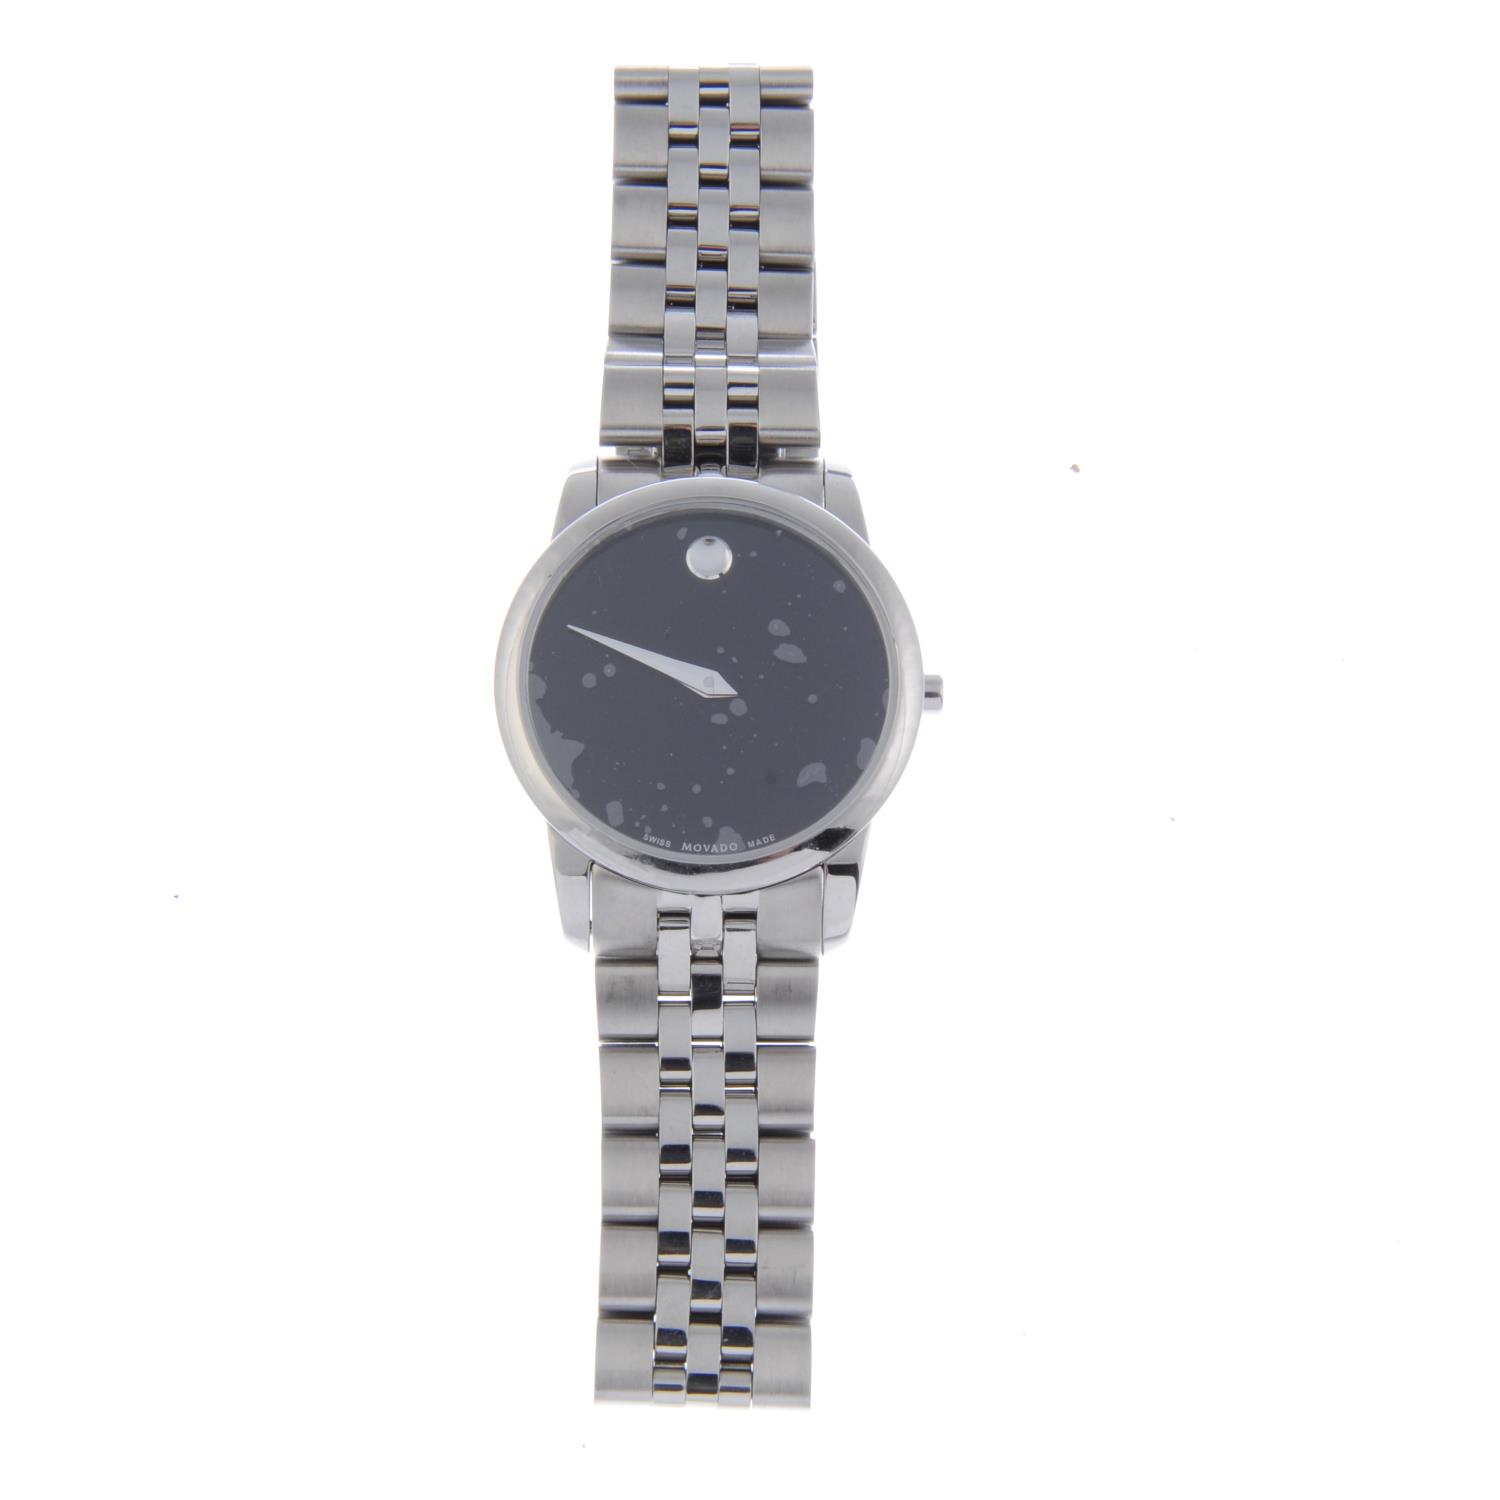 MOVADO - a lady's Museum Classic bracelet watch. - Image 2 of 3